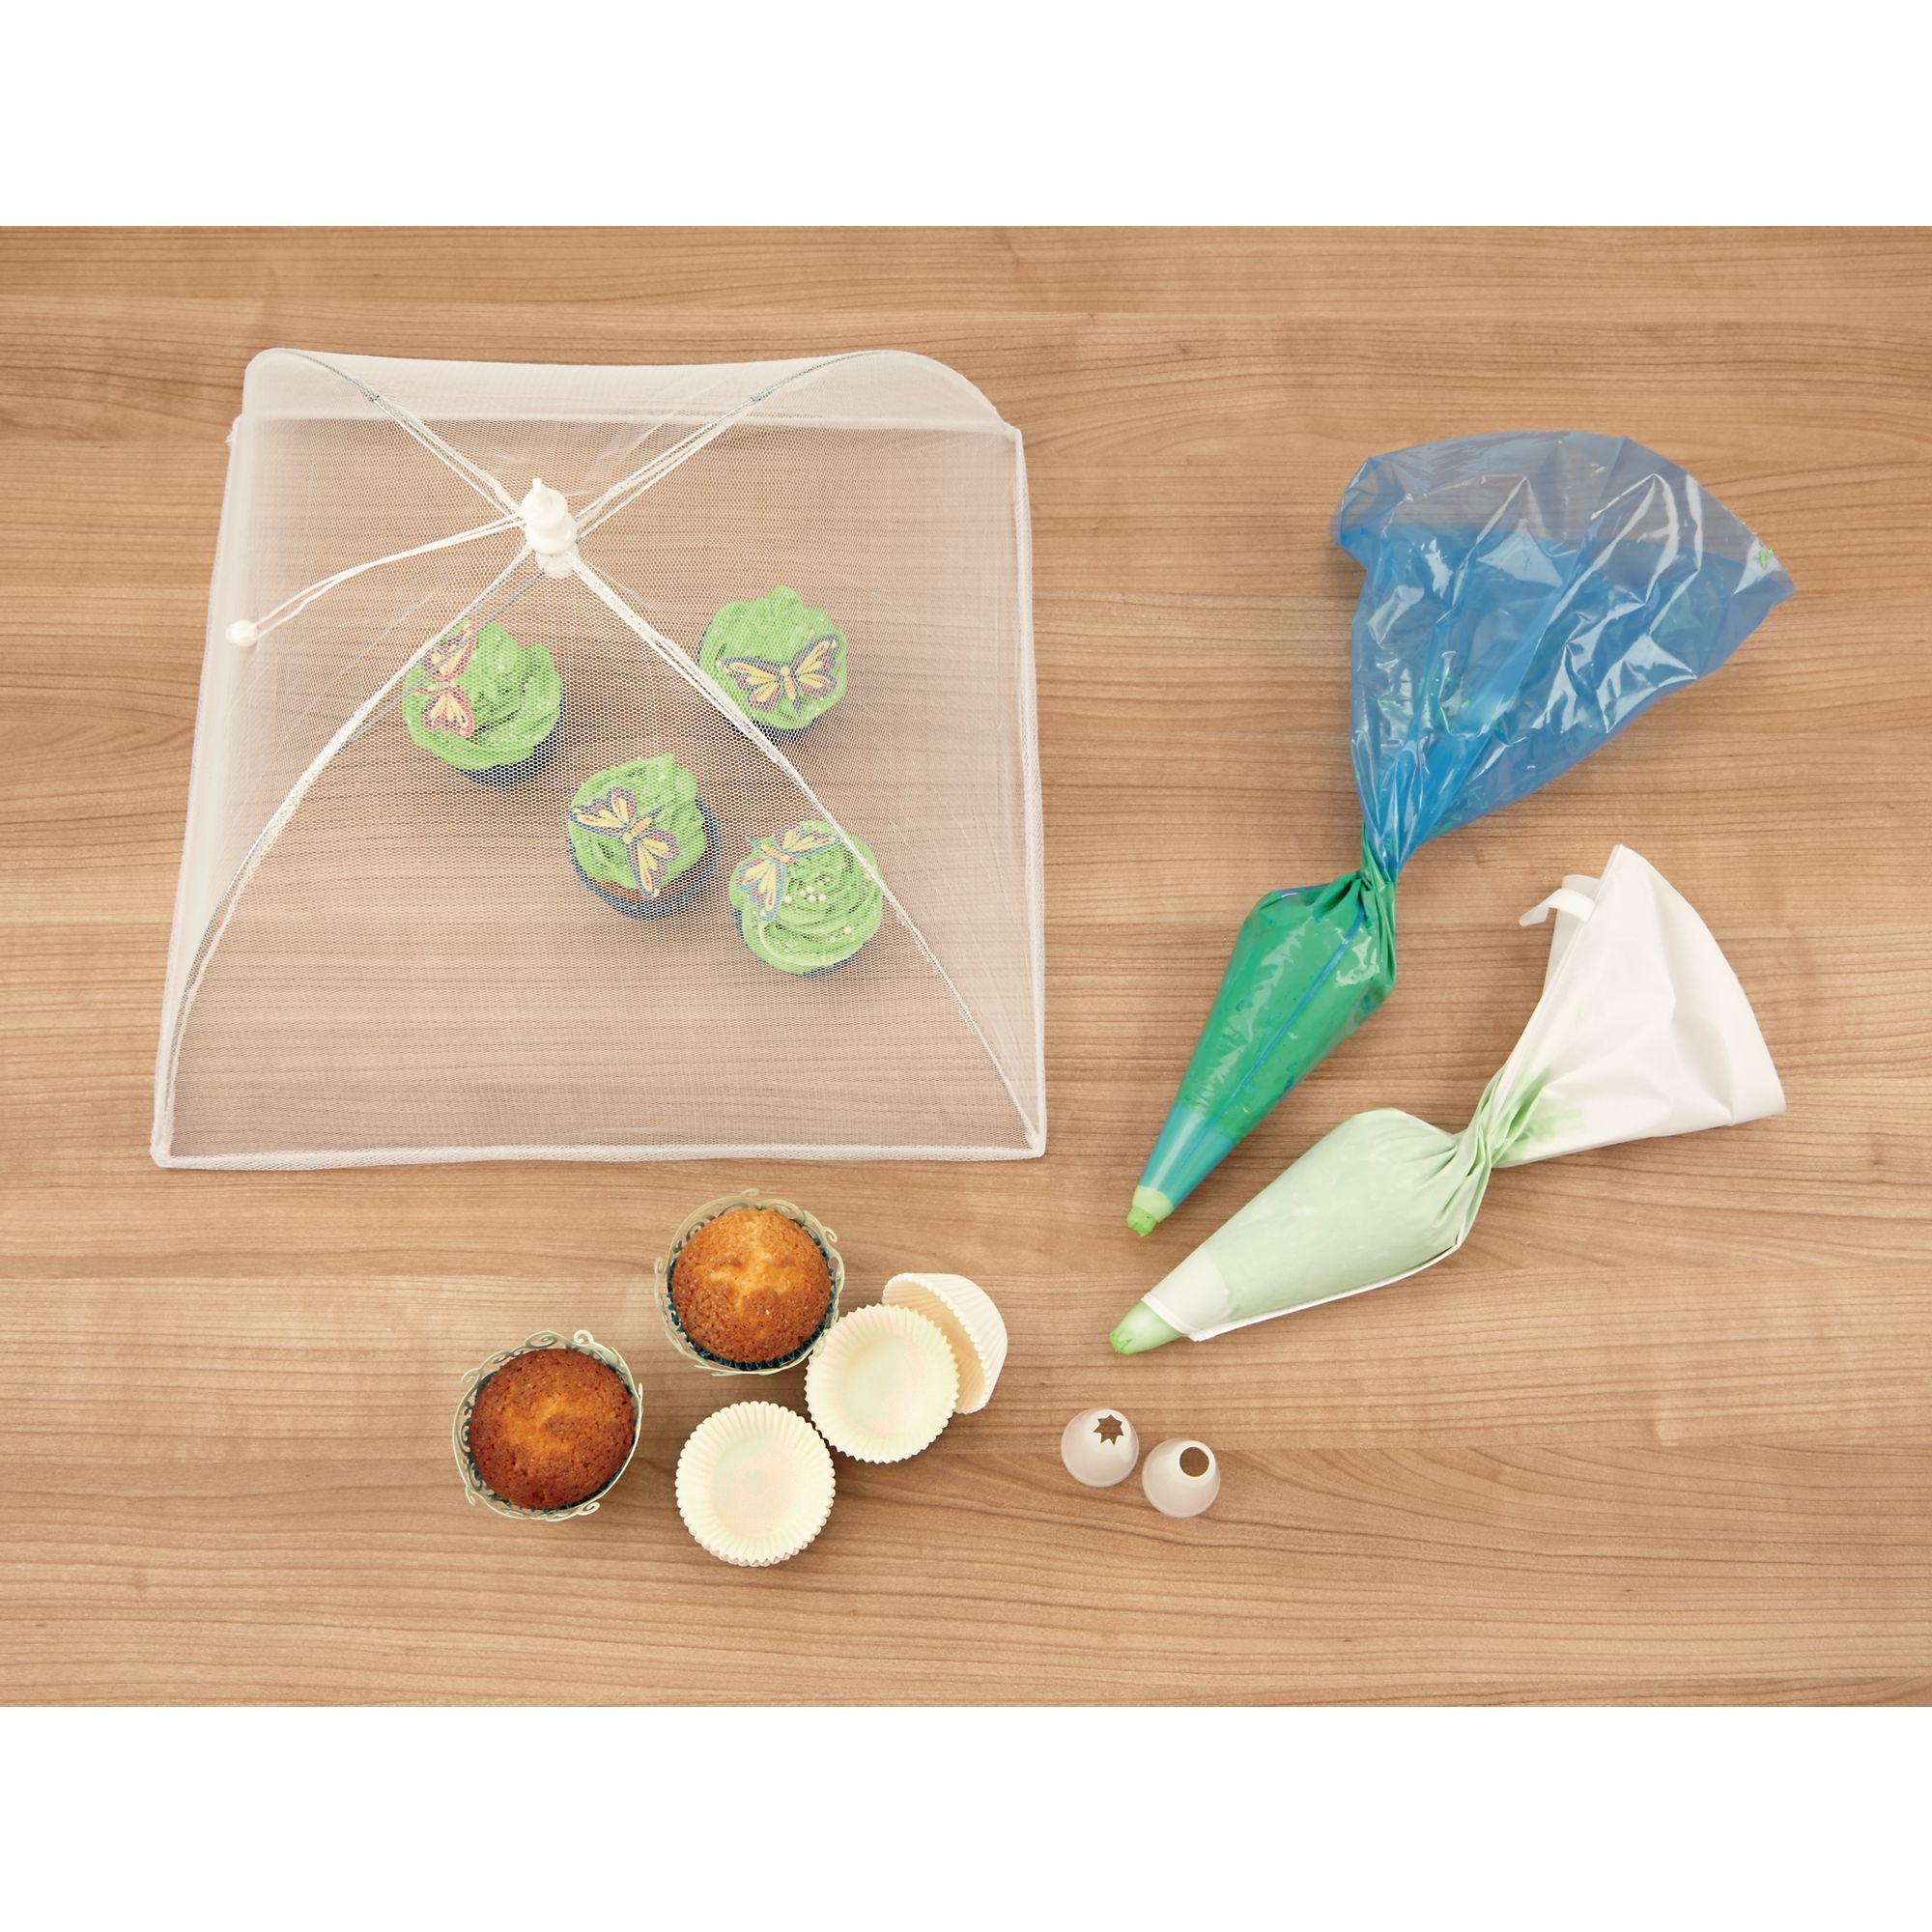 Disposable Icing Bags